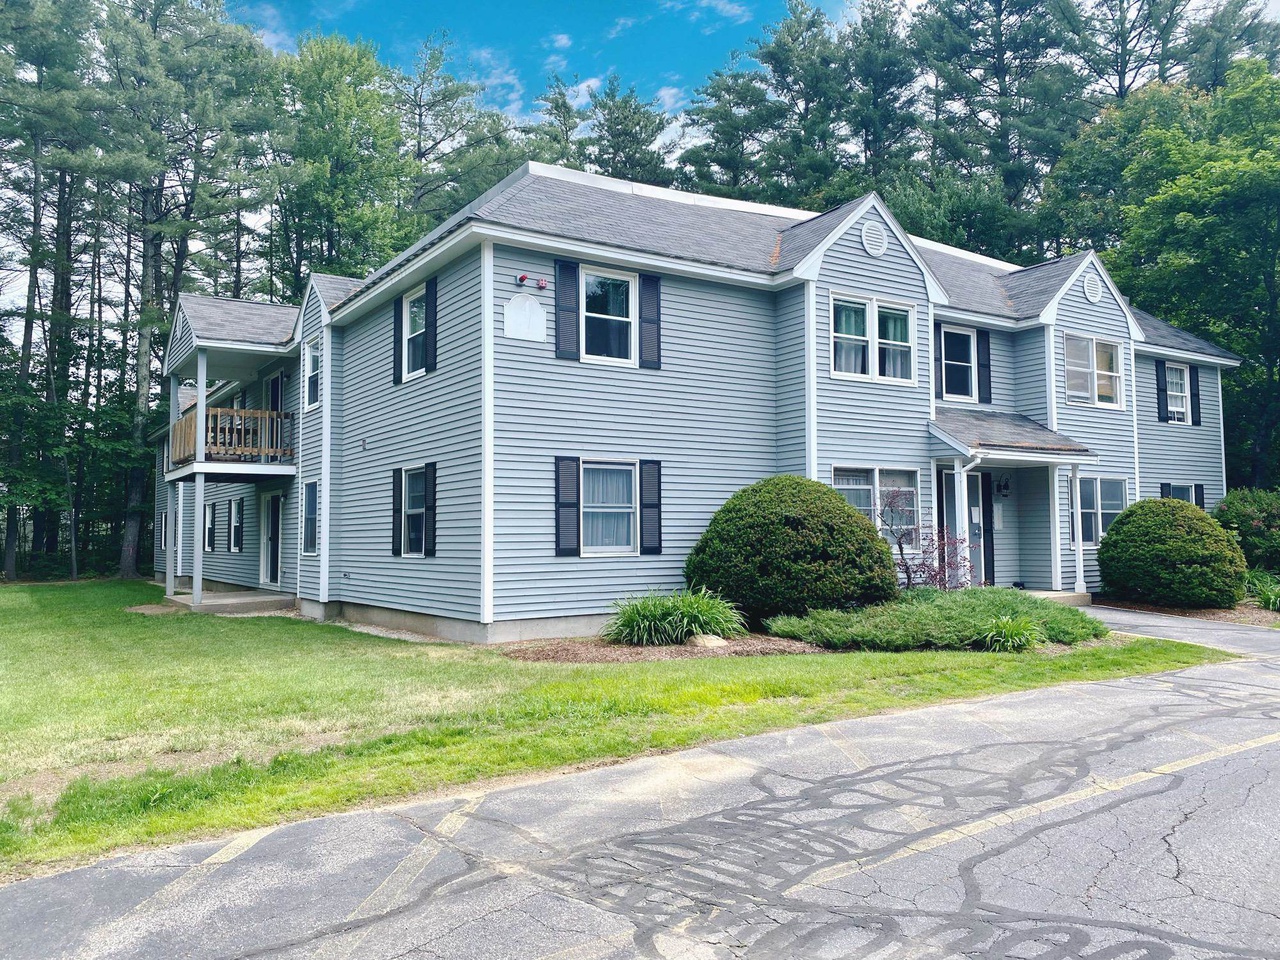 37 Alice Dr #39, Concord, NH 03303 | MLS# 4958073 | Redfin